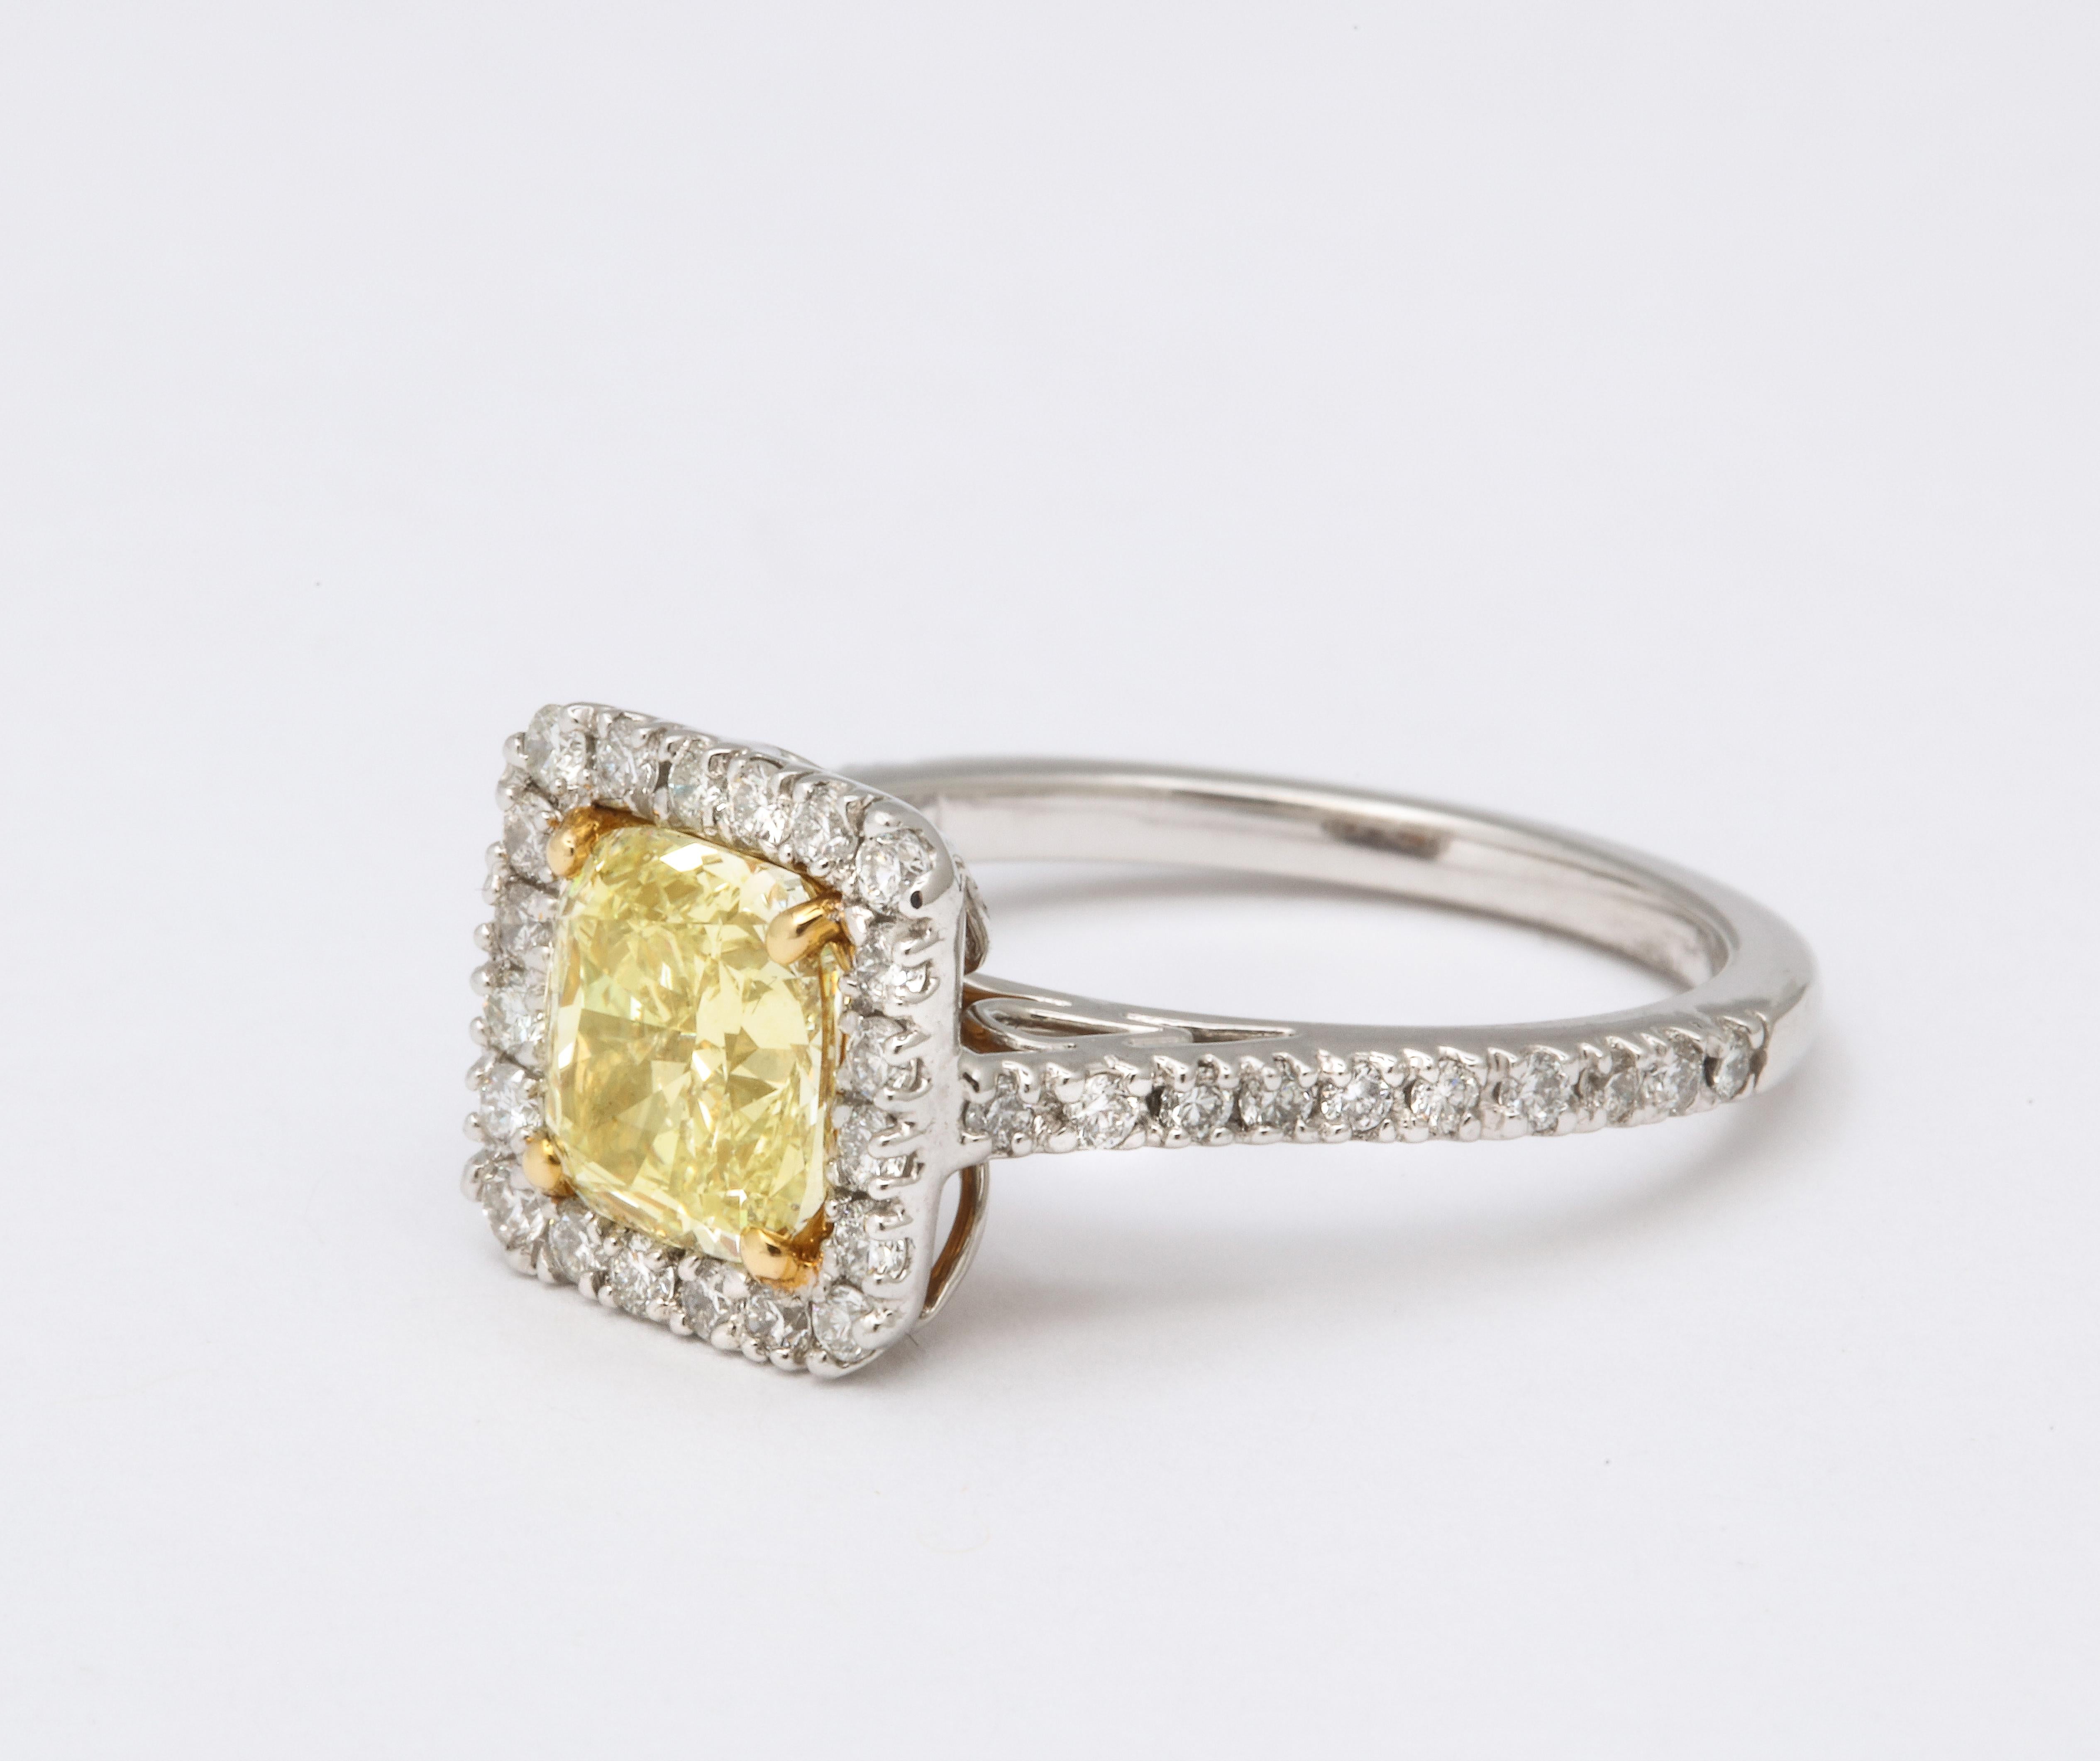 Women's or Men's GIA Certified 1.71 Carat Yellow Diamond Engagement Ring For Sale